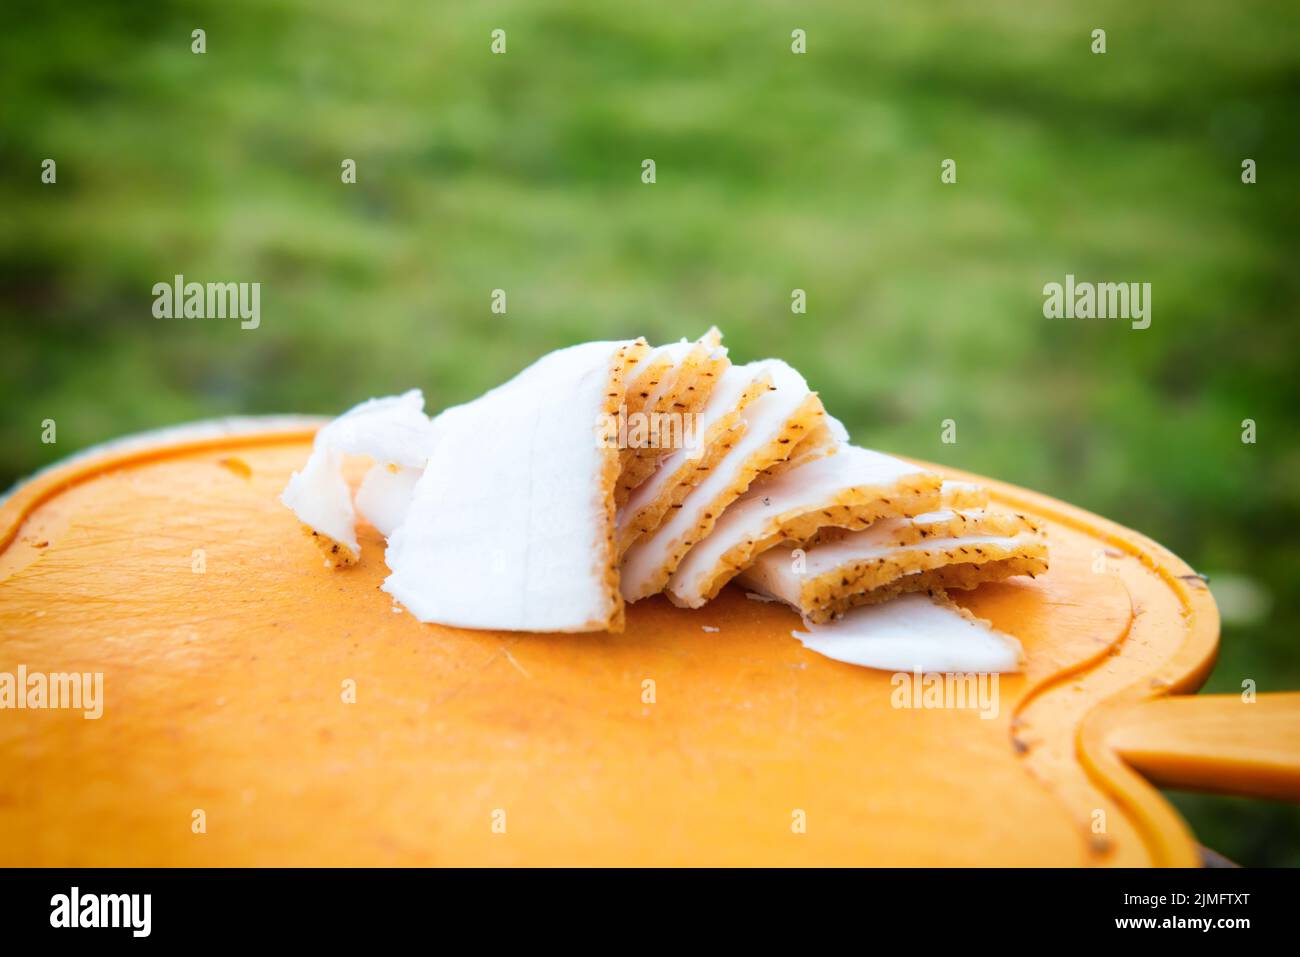 Slices of pig fat on board Stock Photo